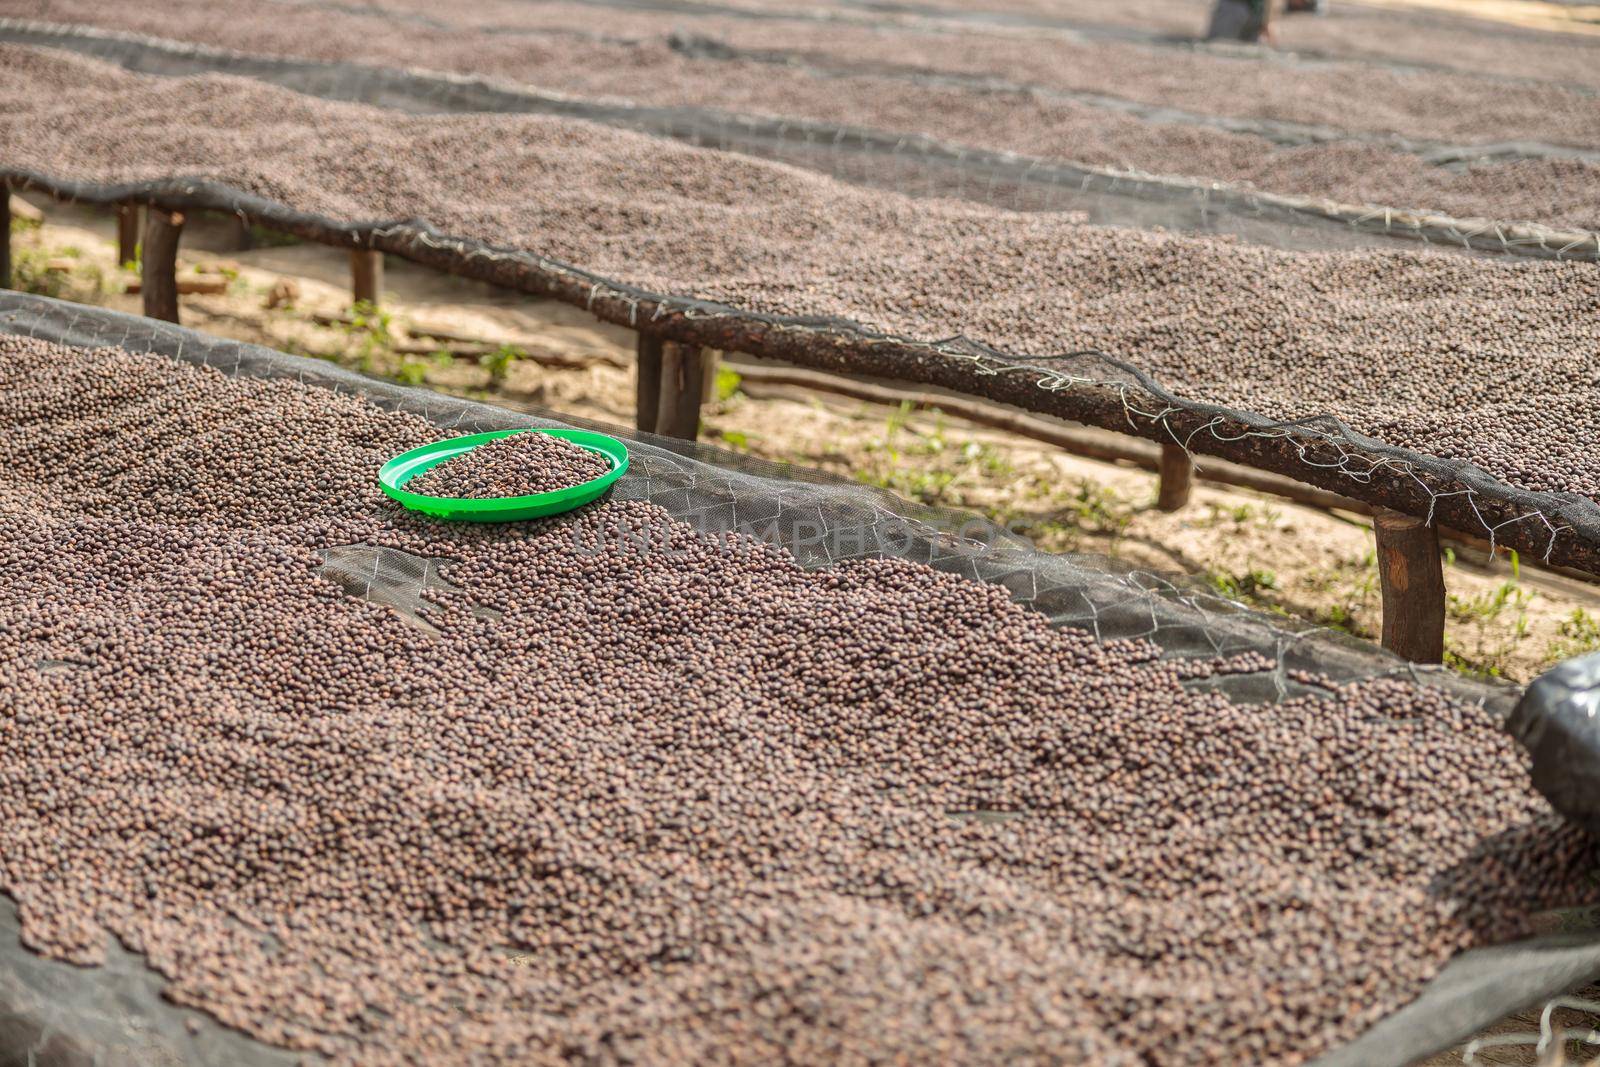 Special tables for drying coffee on the farm outdoors in Africa region